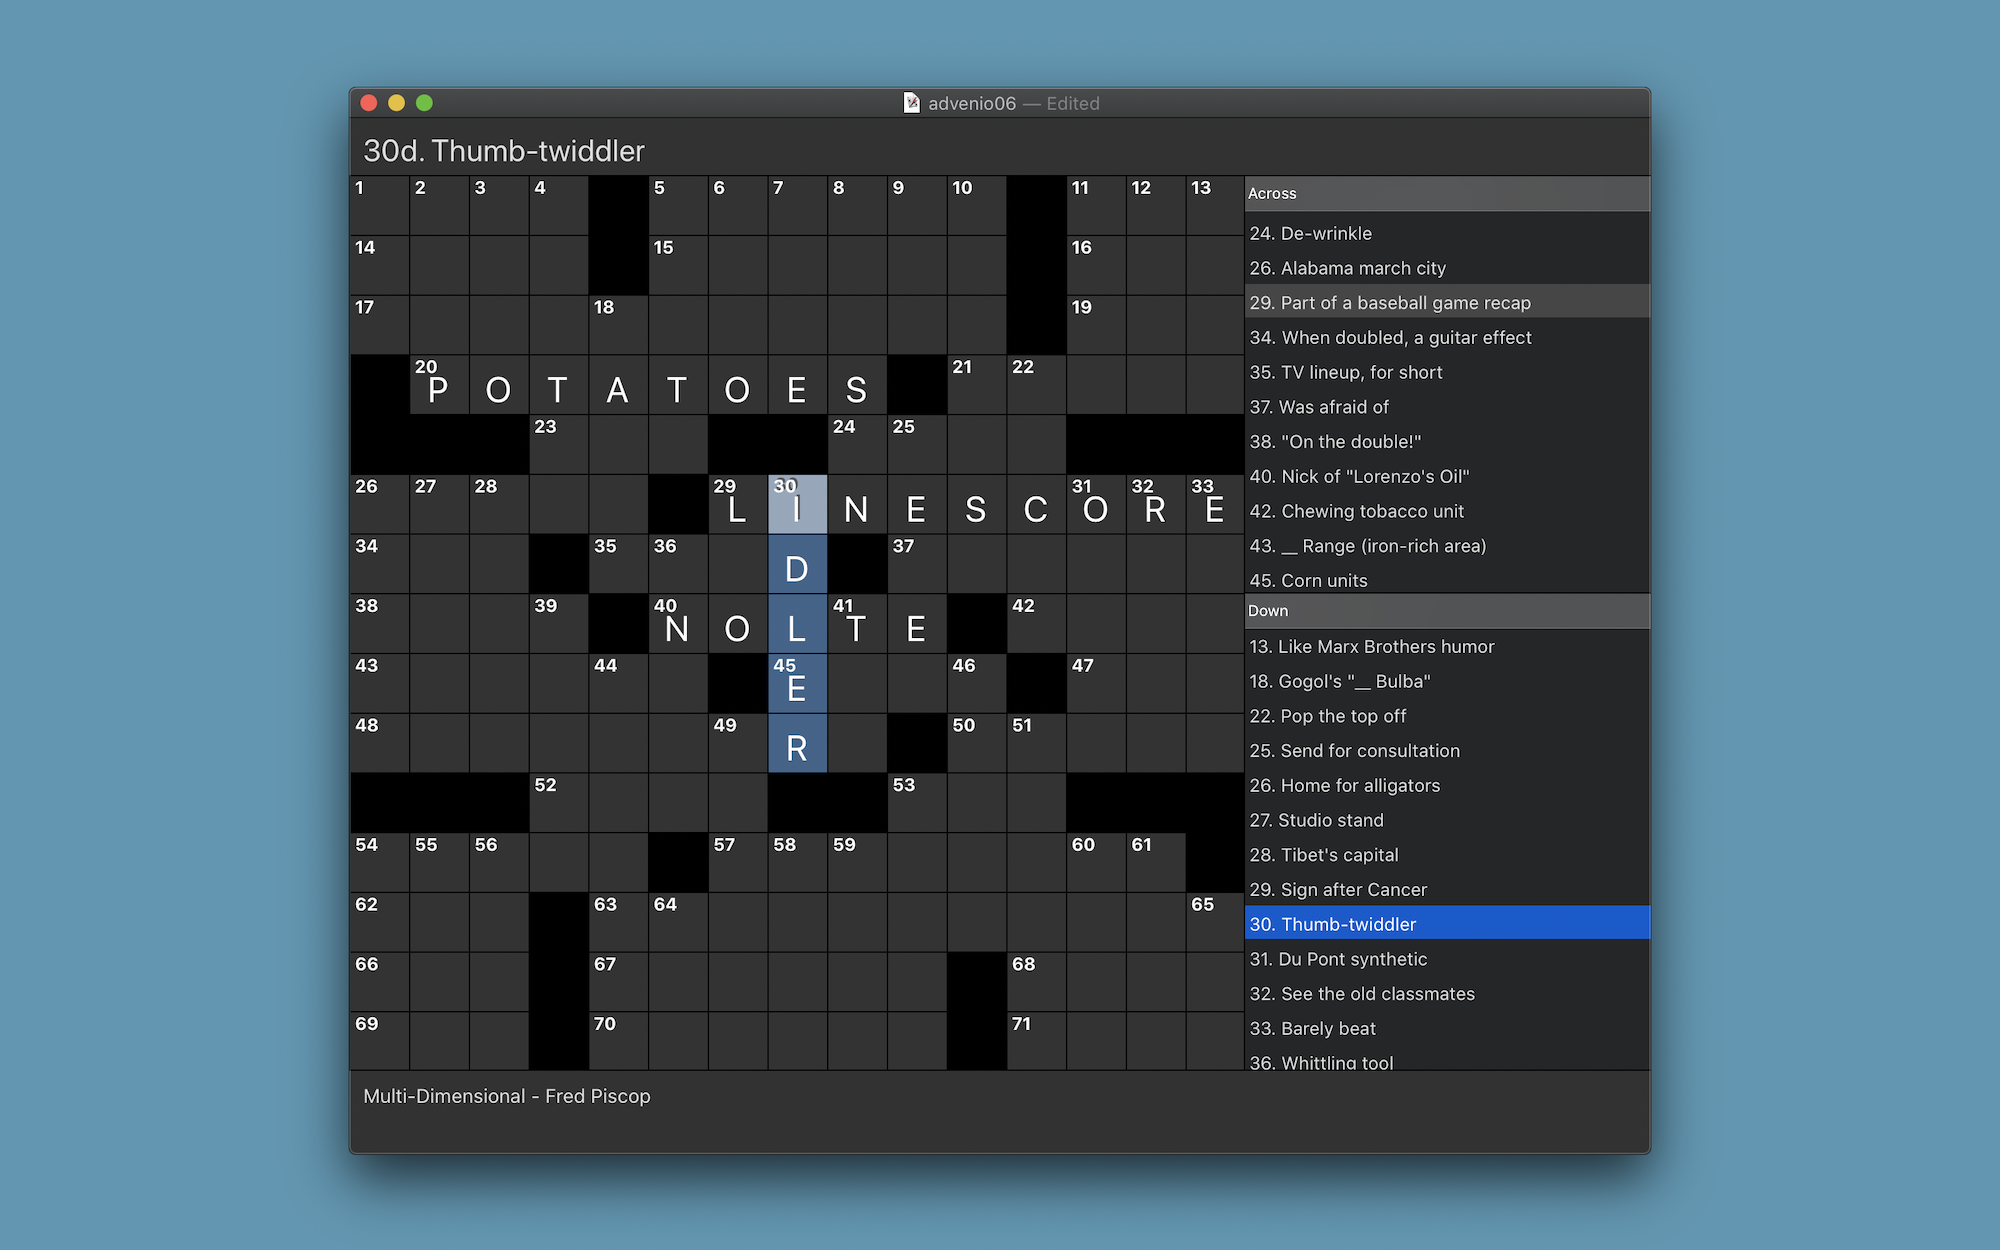 Thumbnail image of Black Ink puzzle solving window in Dark Mode.